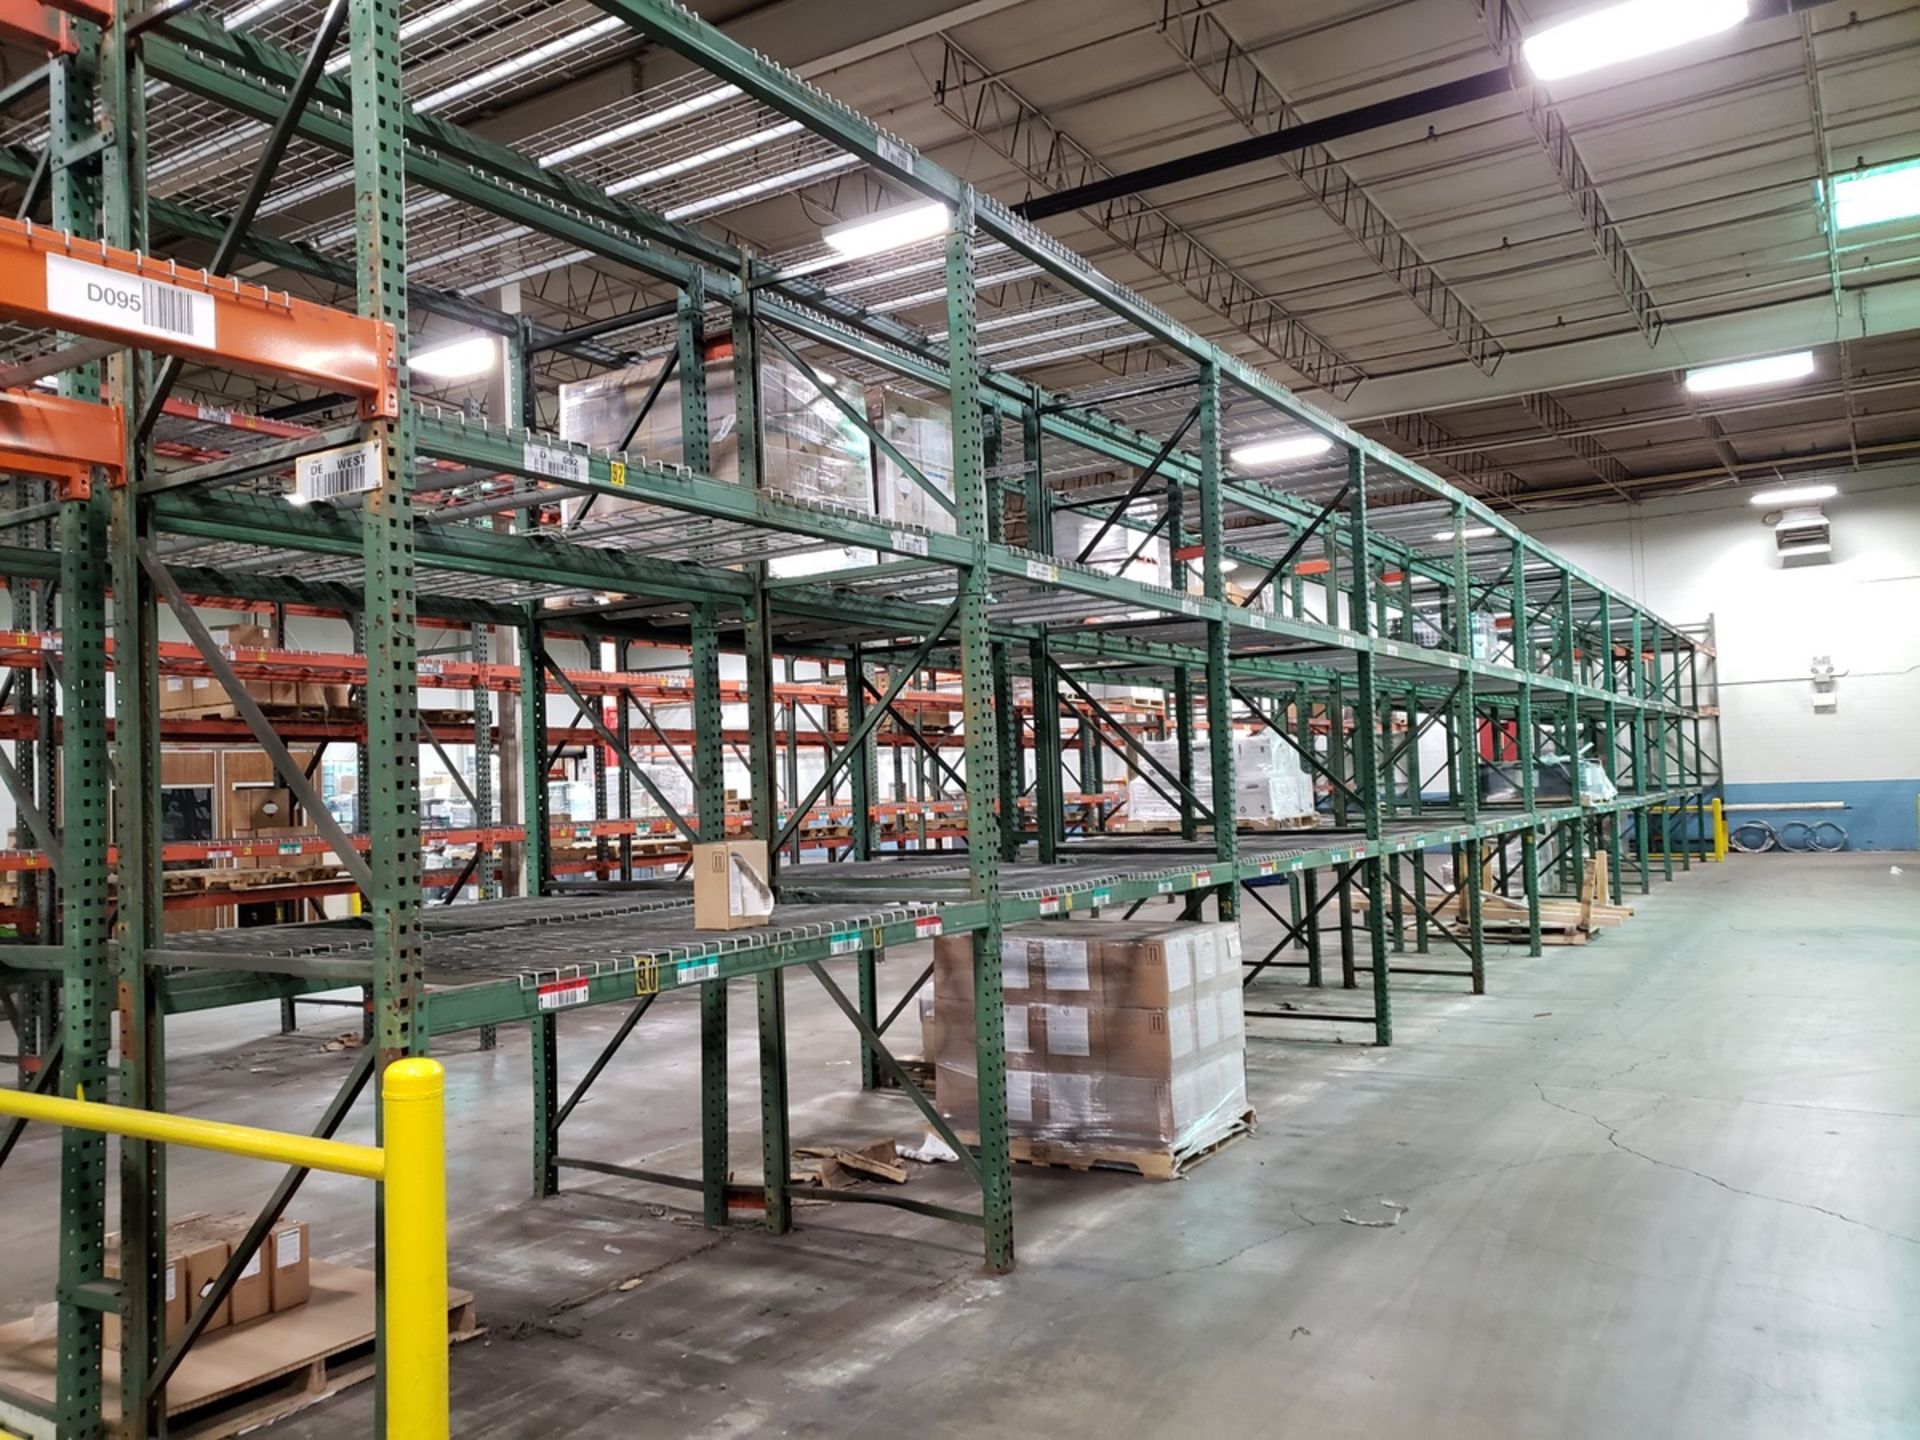 Pallet Rack Section, W/ (24) 42" X 15' Uprights, (23) 42" X 12' U - Subj to Bulk | Rig Fee: See Desc - Image 4 of 4